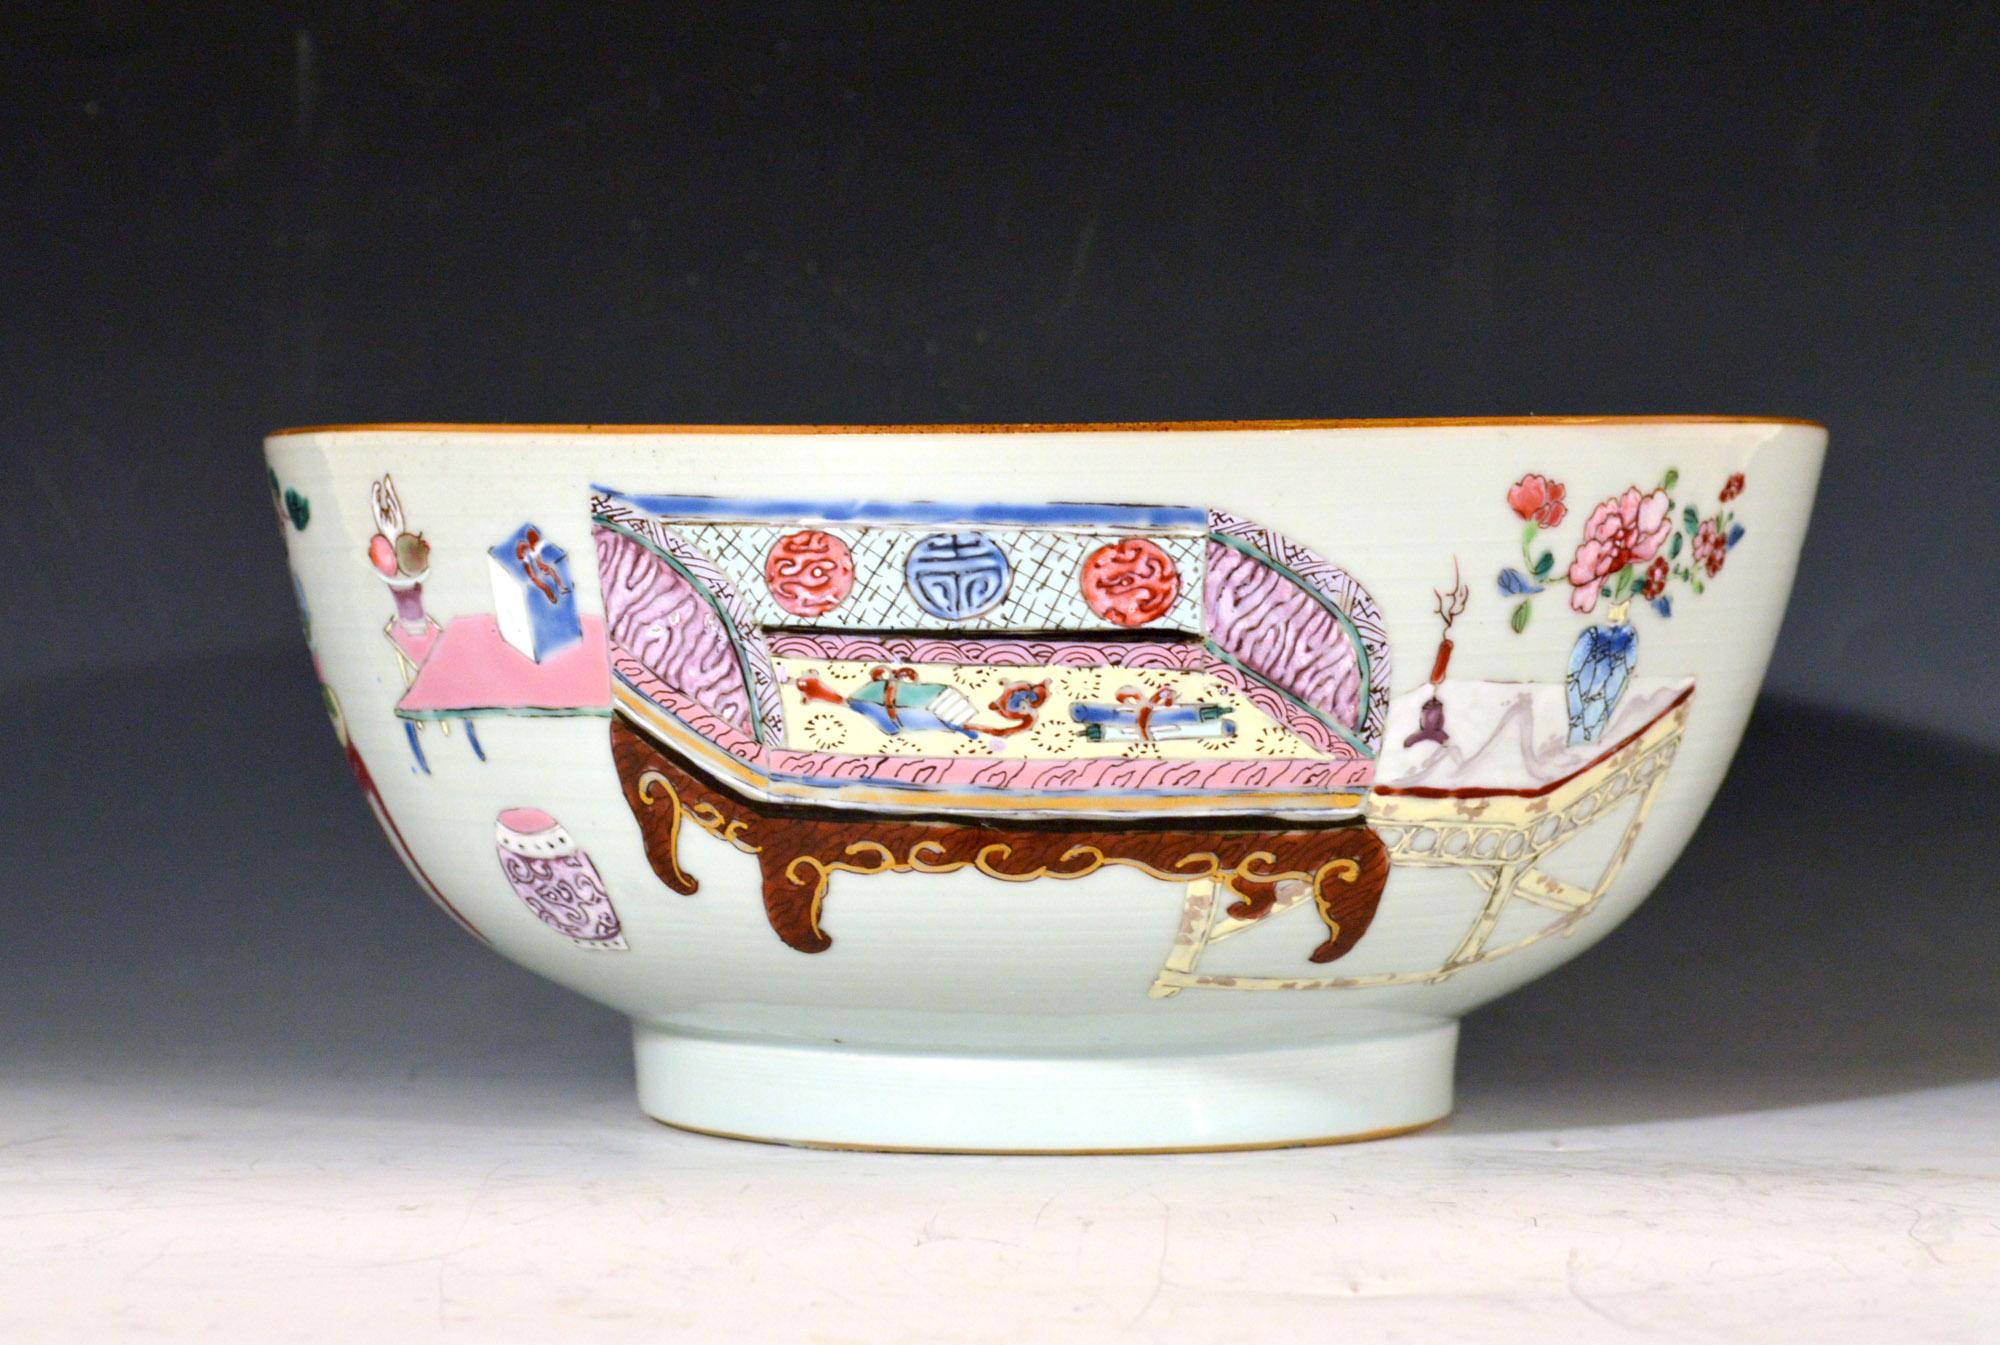 18th Century Chinese Export Porcelain Bowl with Chinese Domestic Furniture For Sale 5